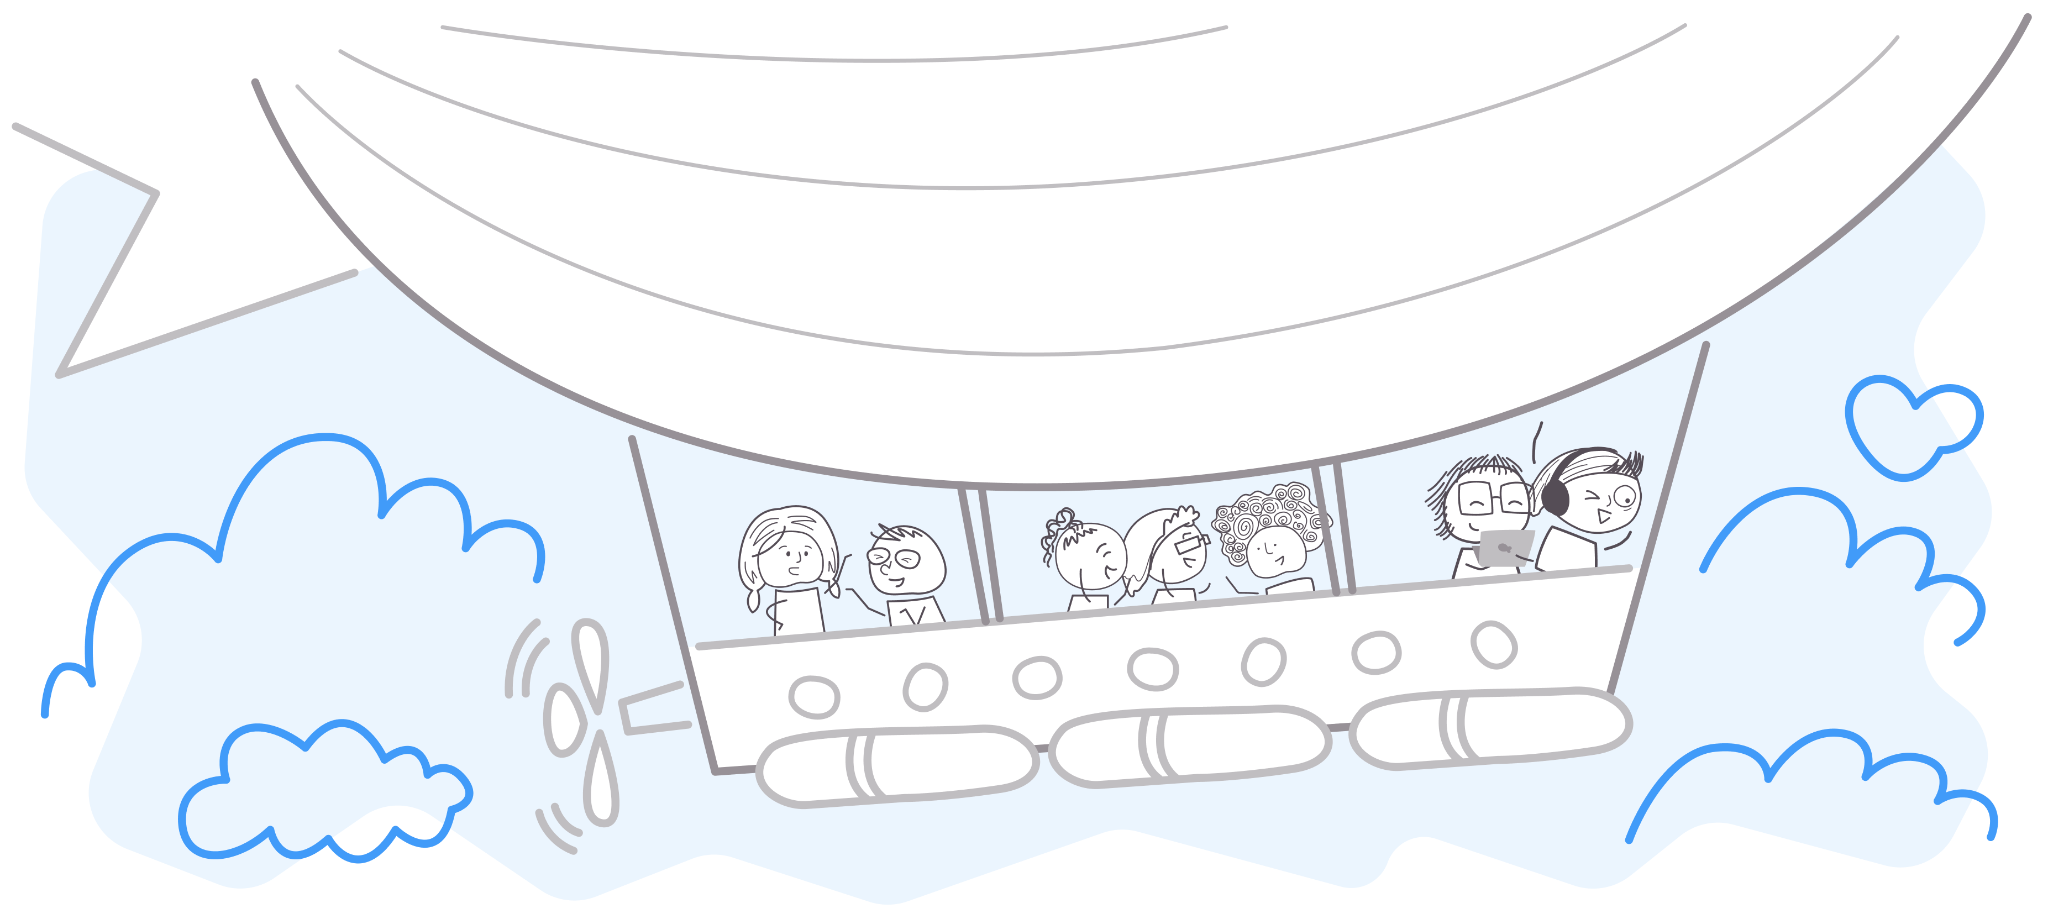 illustrated image of product team on a blimp